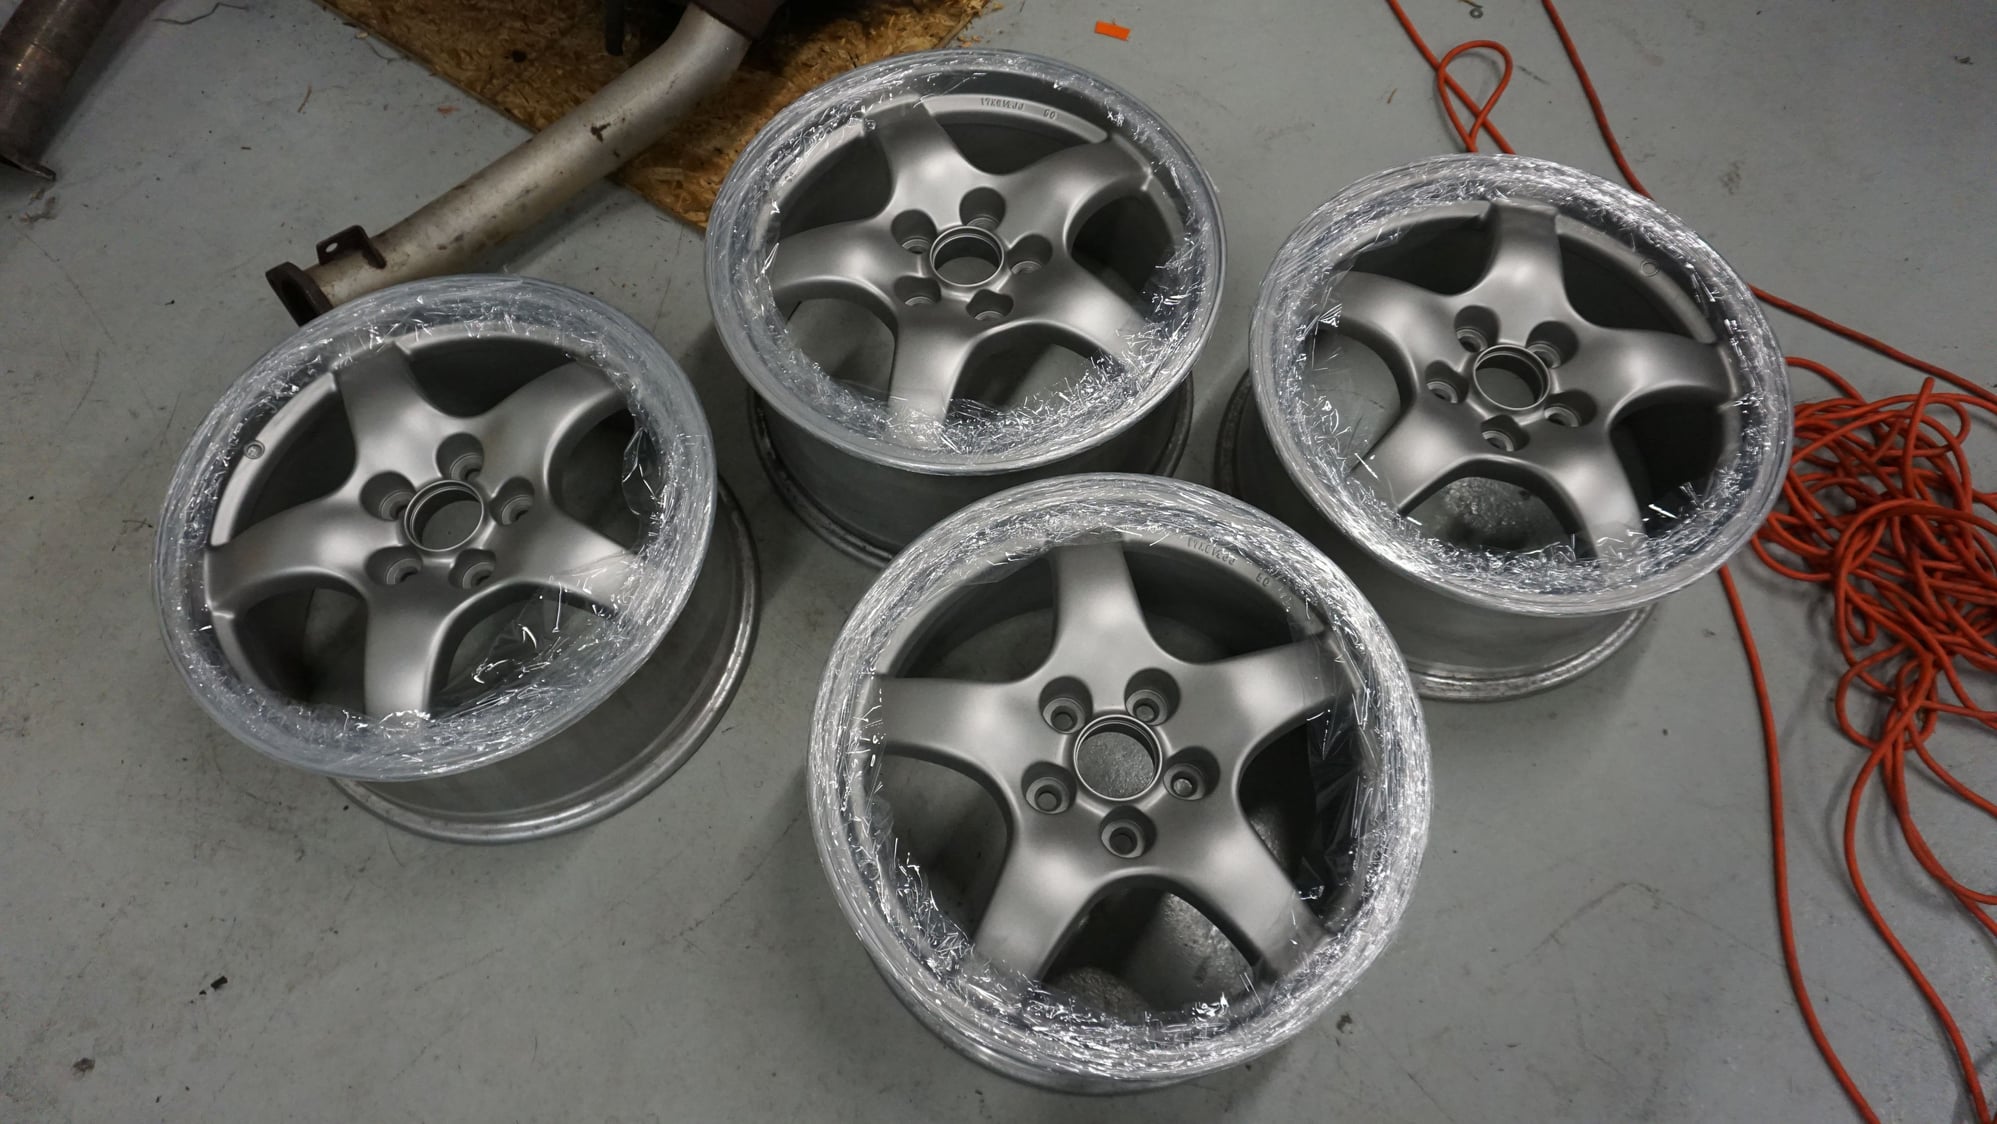 Wheels and Tires/Axles - 17" RS Wheels 10/10 Condition - Used - 1993 to 2002 Mazda RX-7 - Tampa, FL 33634, United States